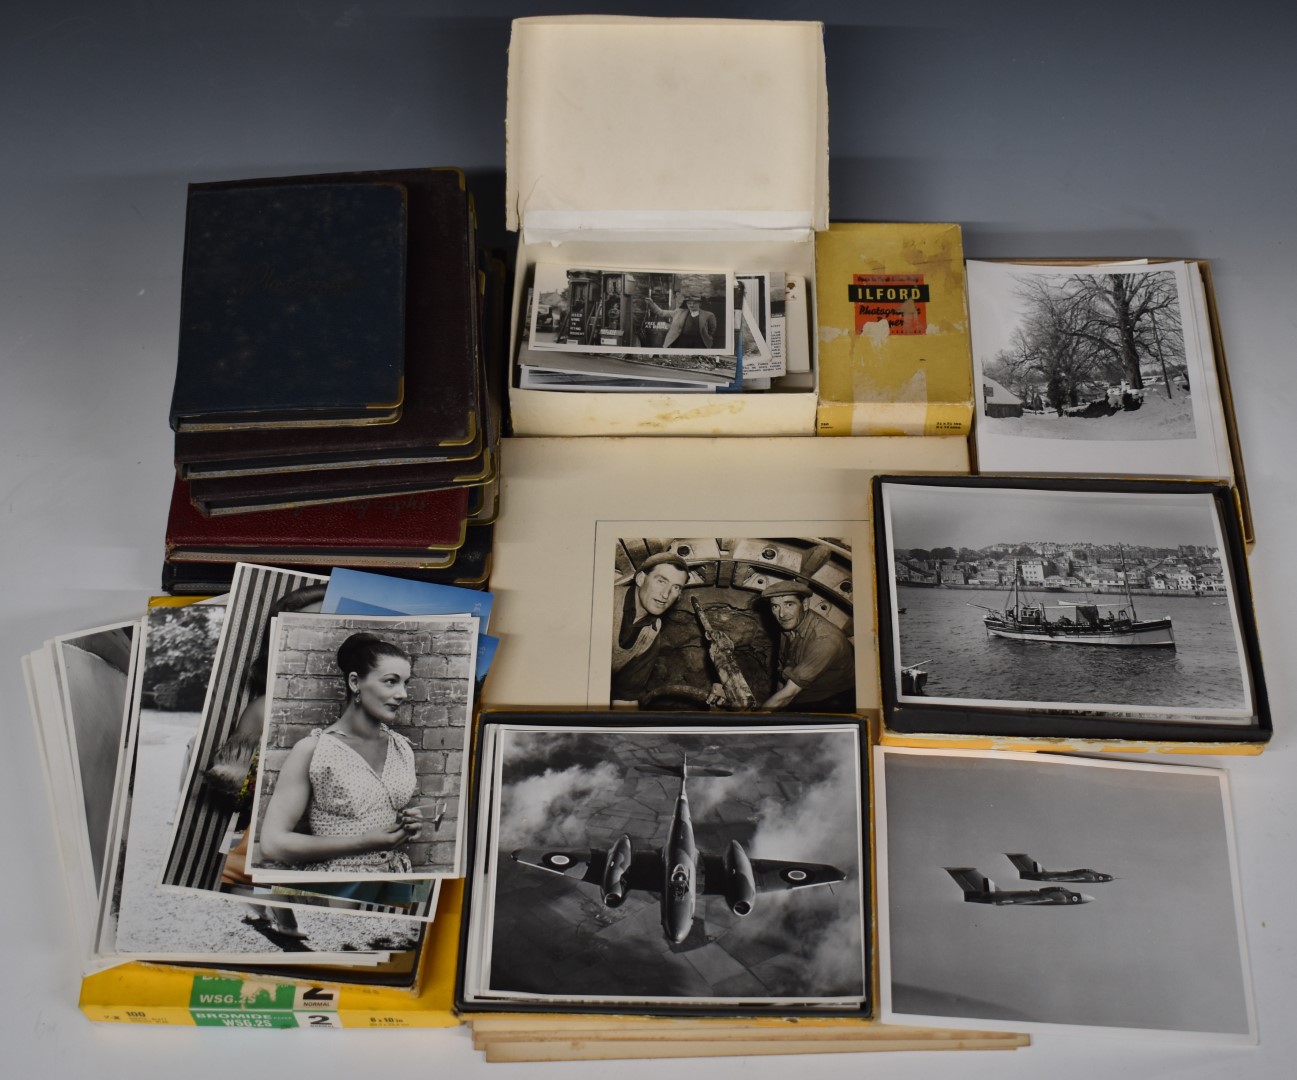 A large collection of c1950s photographs, loose and in albums, including glamour, vintage